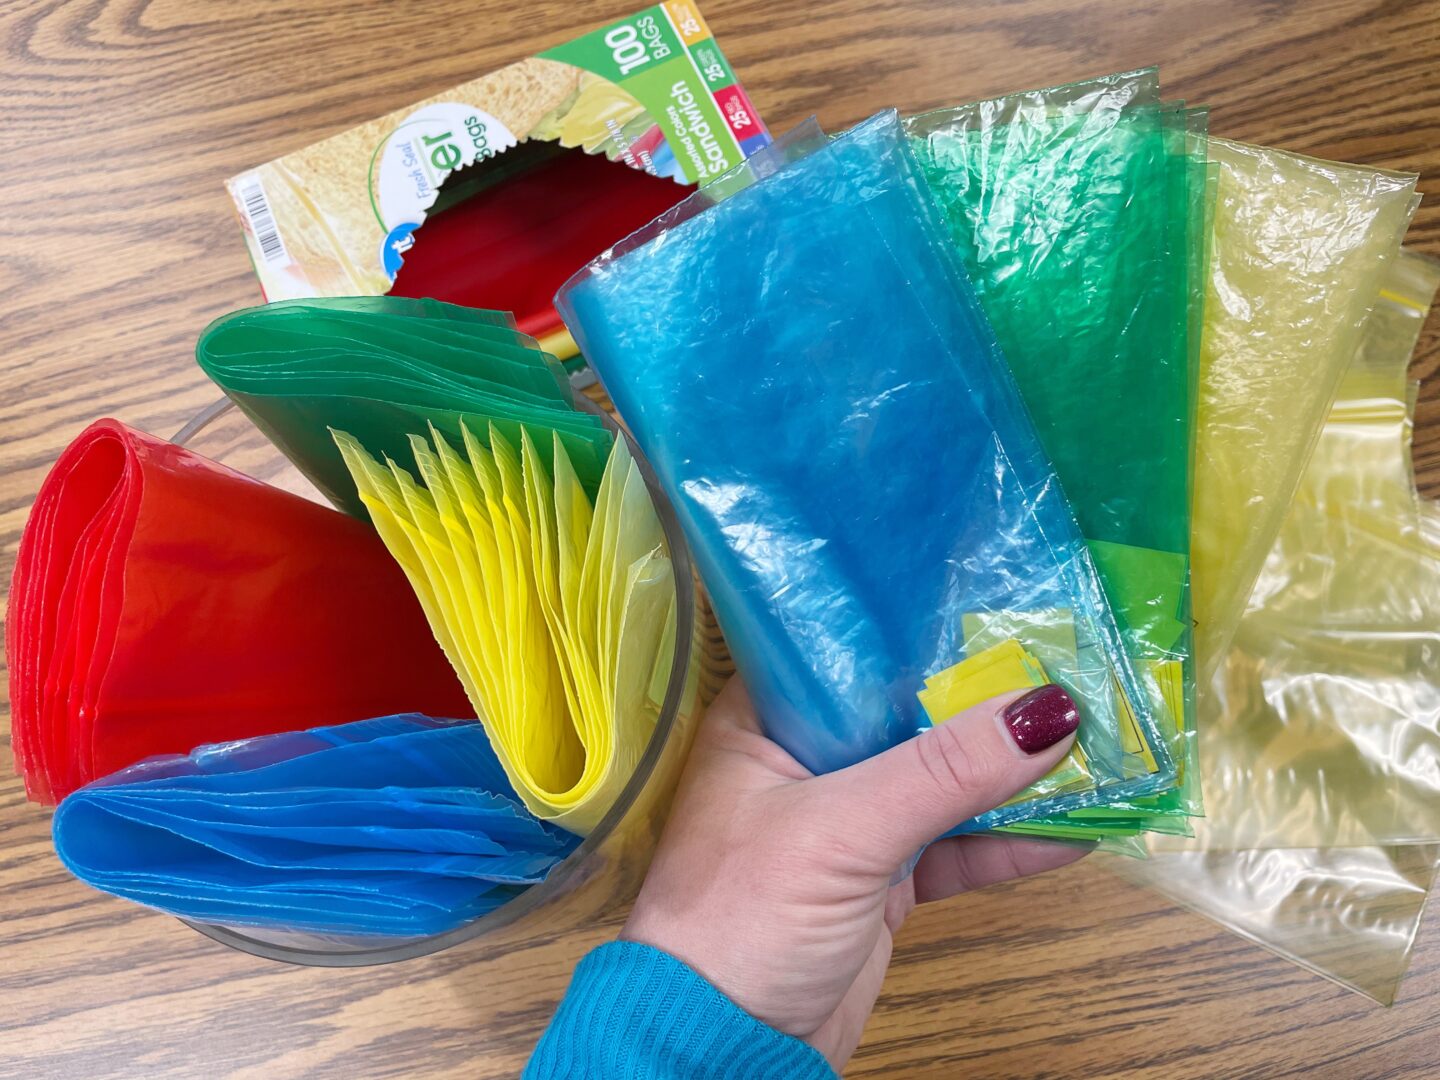 Image of Primary Gal holding multiple Colored Sandwich Bags in her Hand